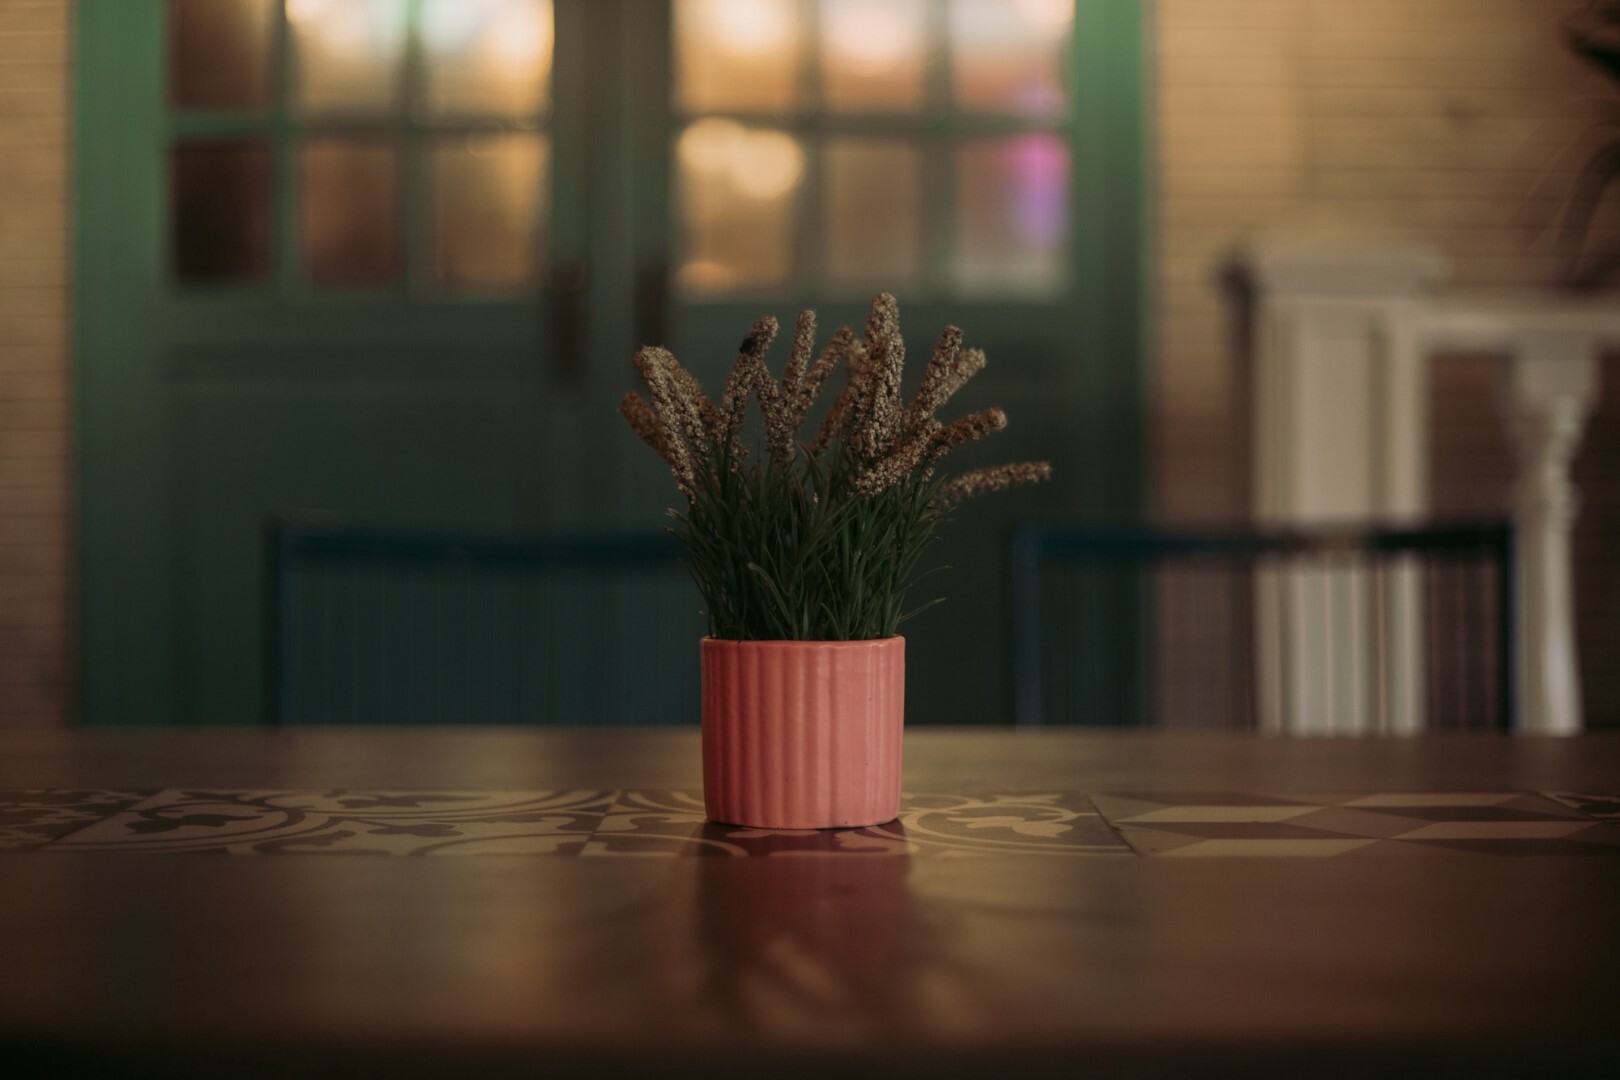 A plant on the table